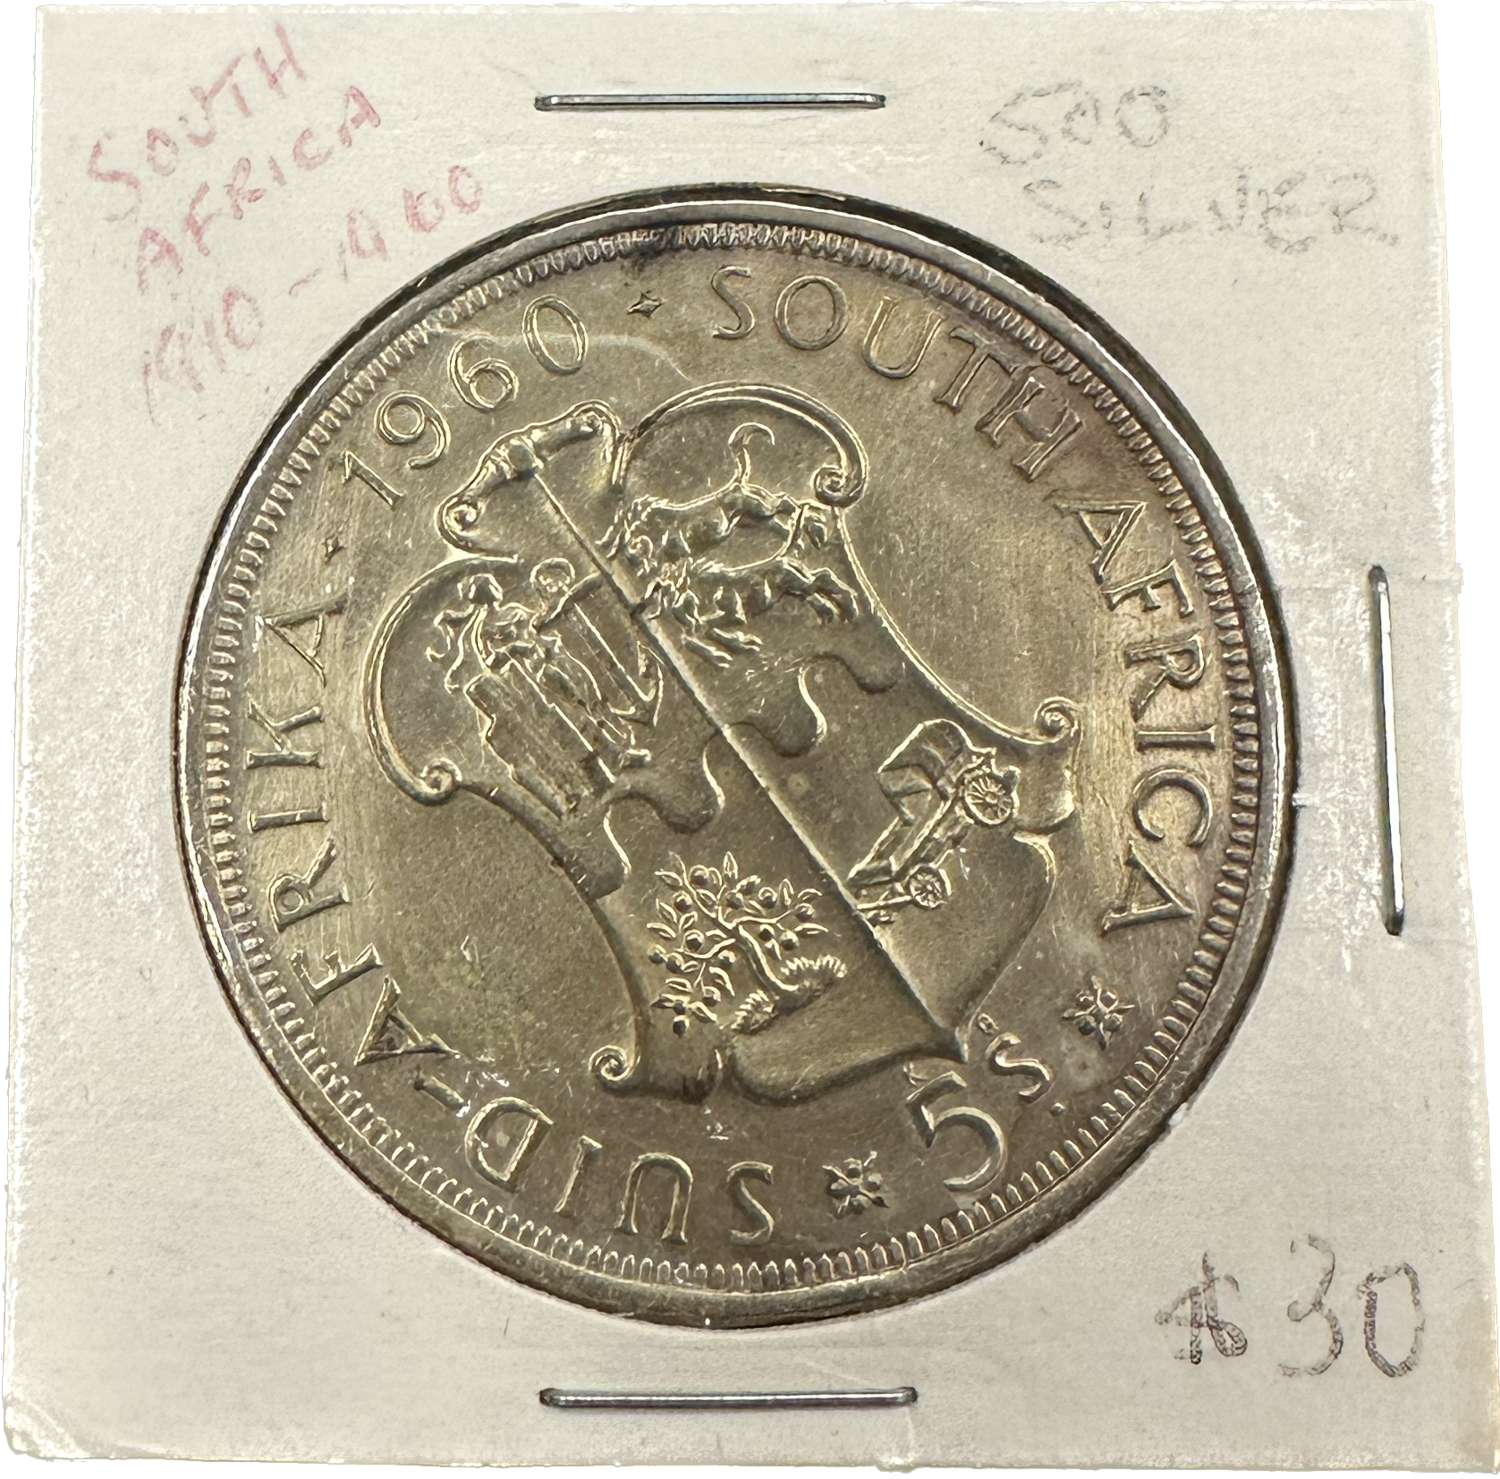 South Africa 5 Shillings 1910-1960 Silver Coin